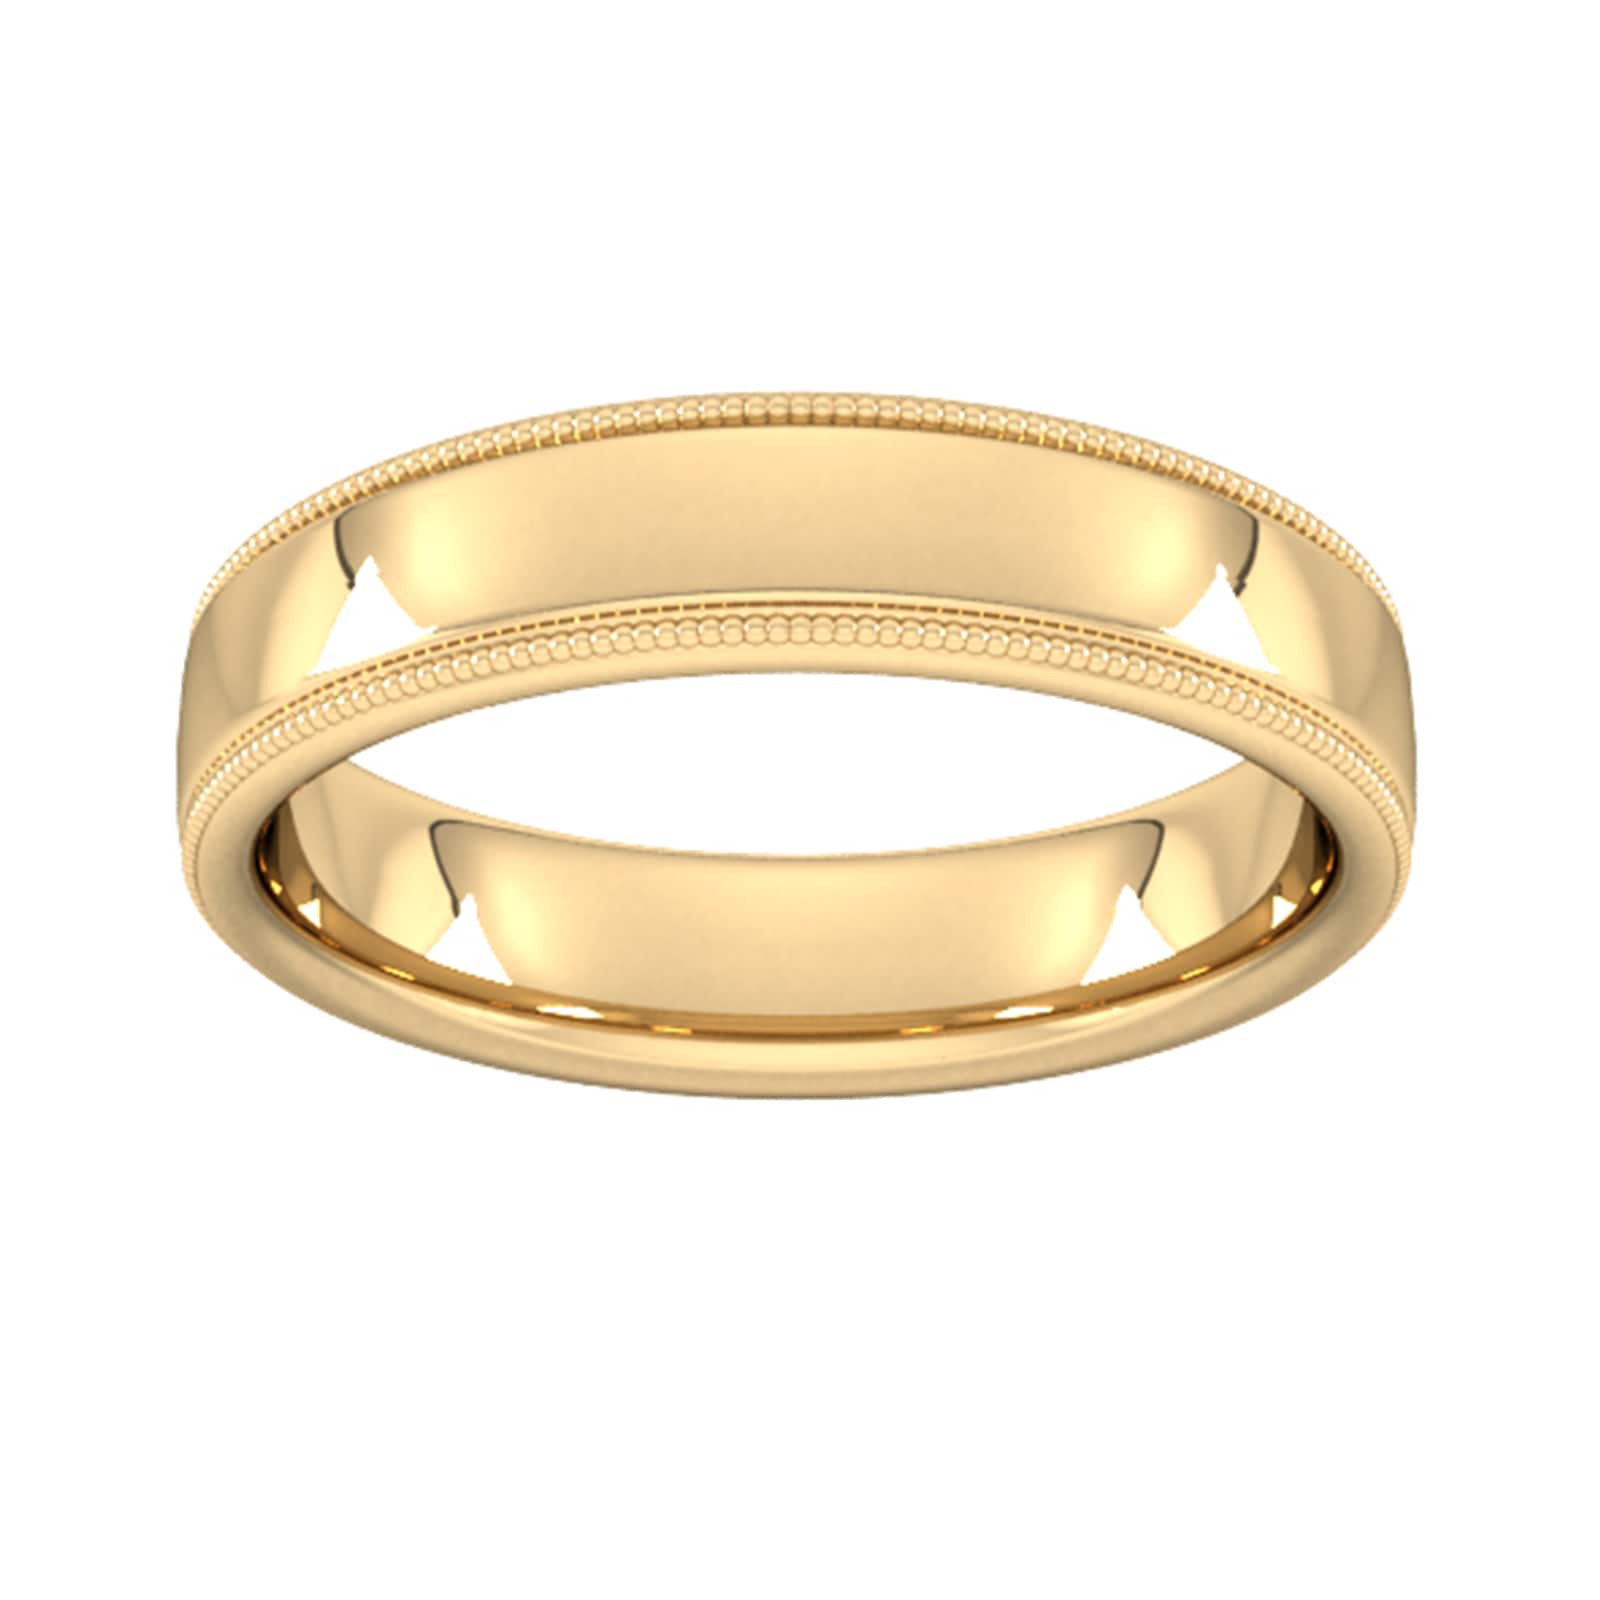 Popular 9ct Mens Gold Wedding Band, Mens Wedding Rings South Africa